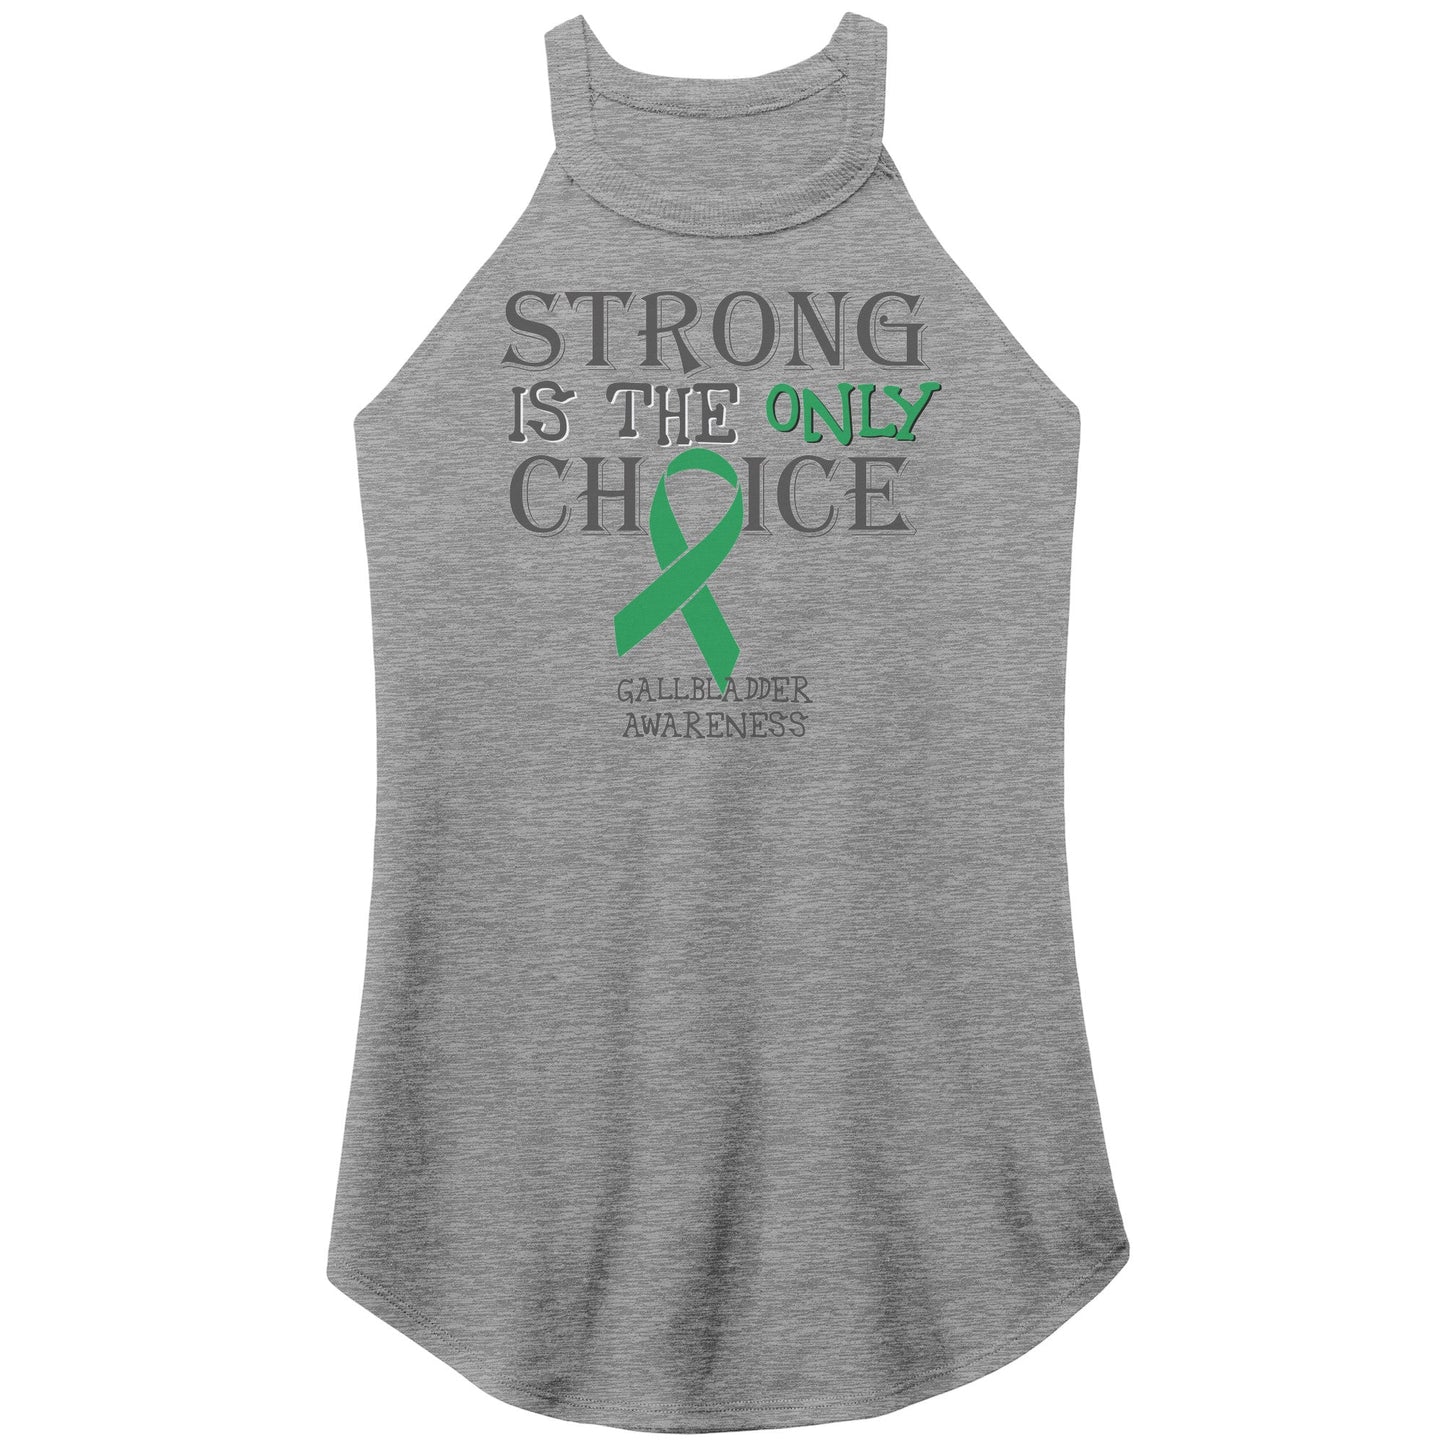 Strong is the Only Choice -Gallbladder Cancer Awareness T-Shirt, Hoodie, Tank |x|